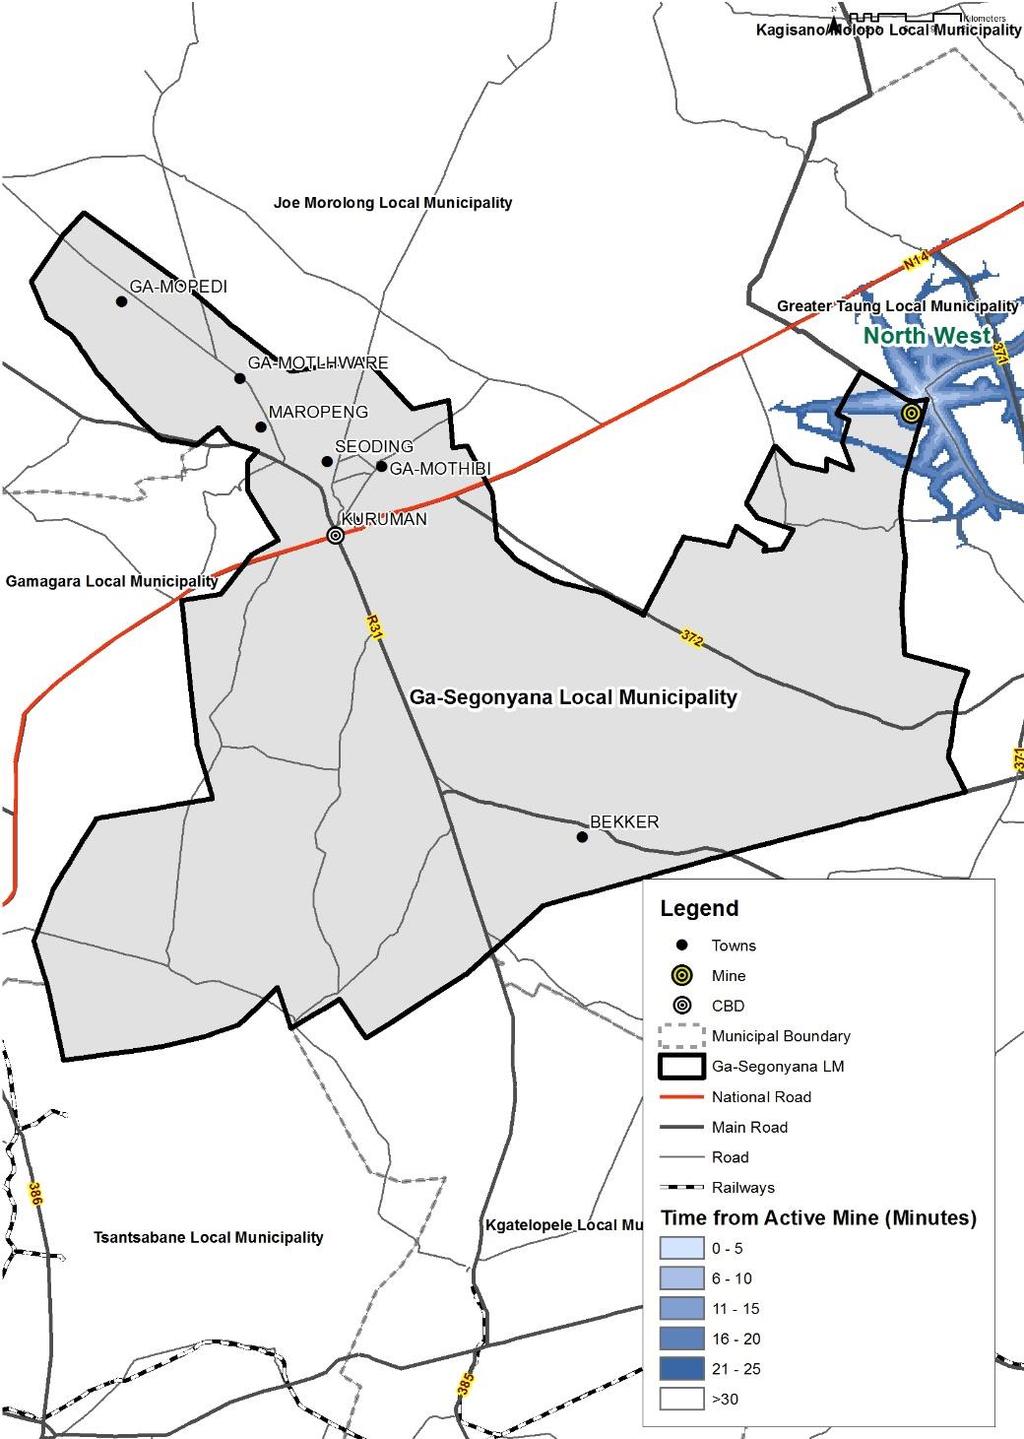 accessibility analysis active mines Section 10: Spatial development framework This map tests housing projects identified in the SDF in terms of how accessible these projects are to employment